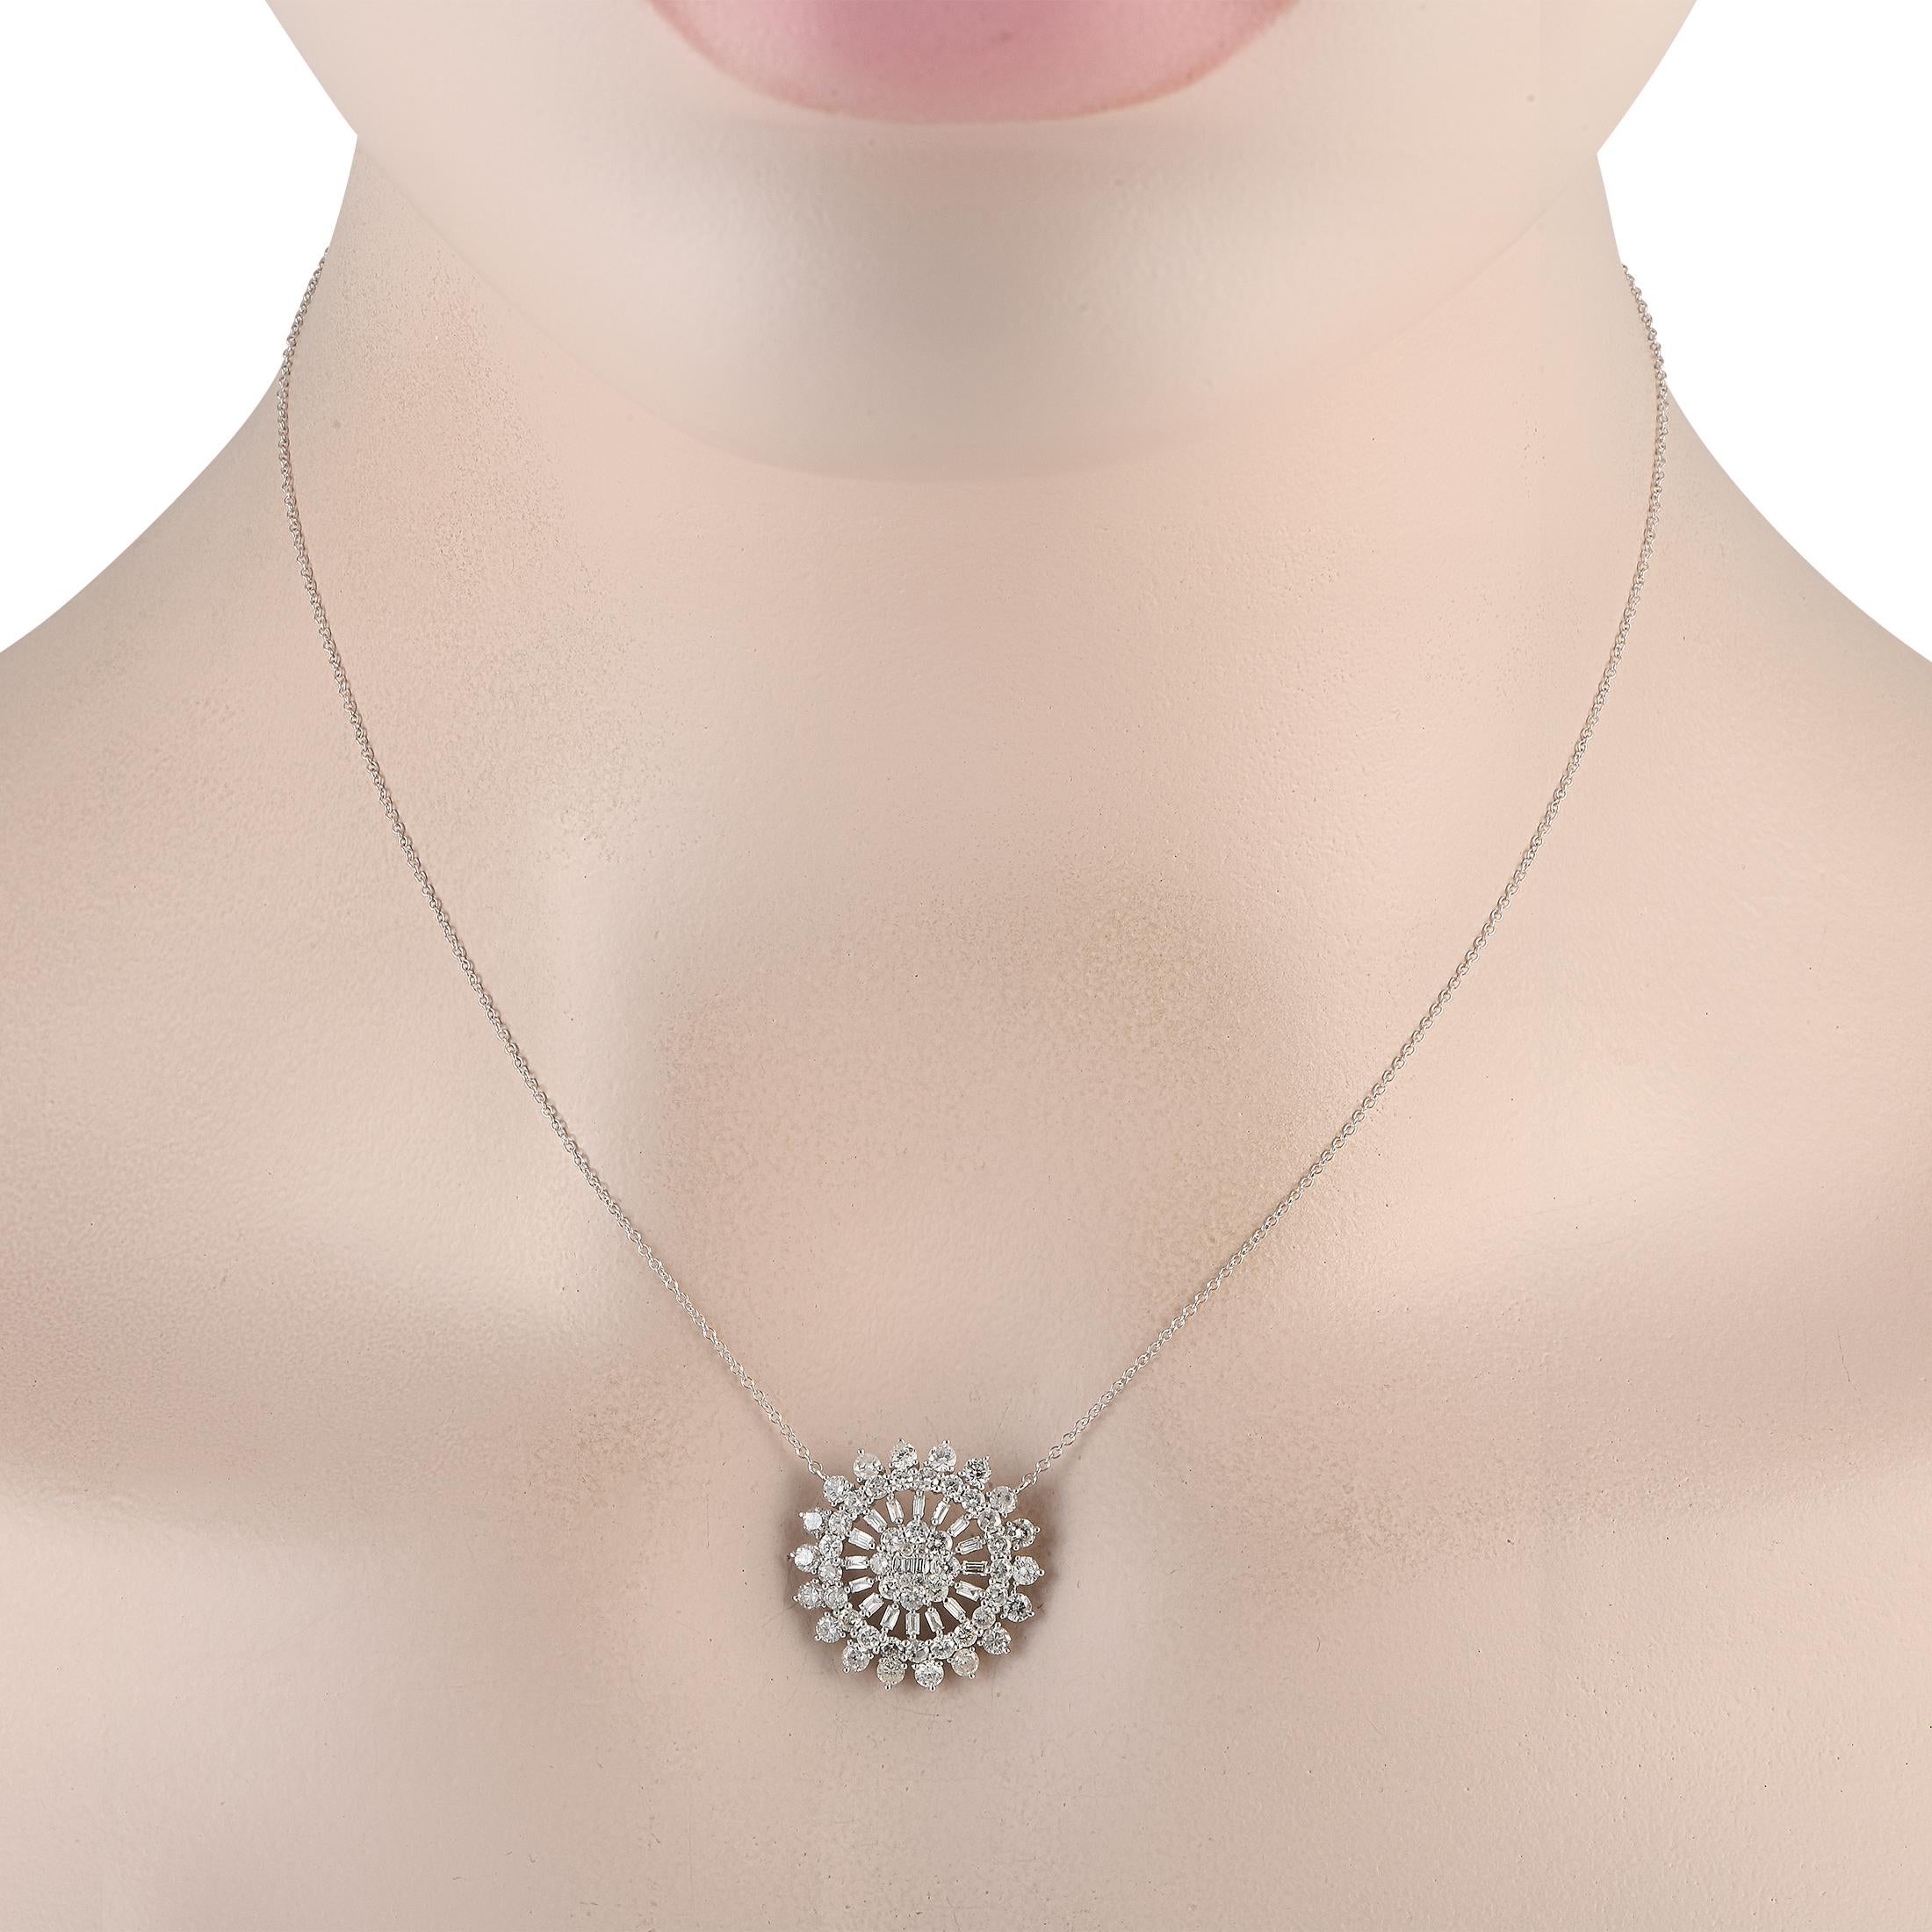 You will love the goes-with-everything style of this necklace. It features a thin, barely-there necklace chain holding a 0.75-wide round pendant in sunburst motif. The pendant features a combination of baguette and round diamonds secured by